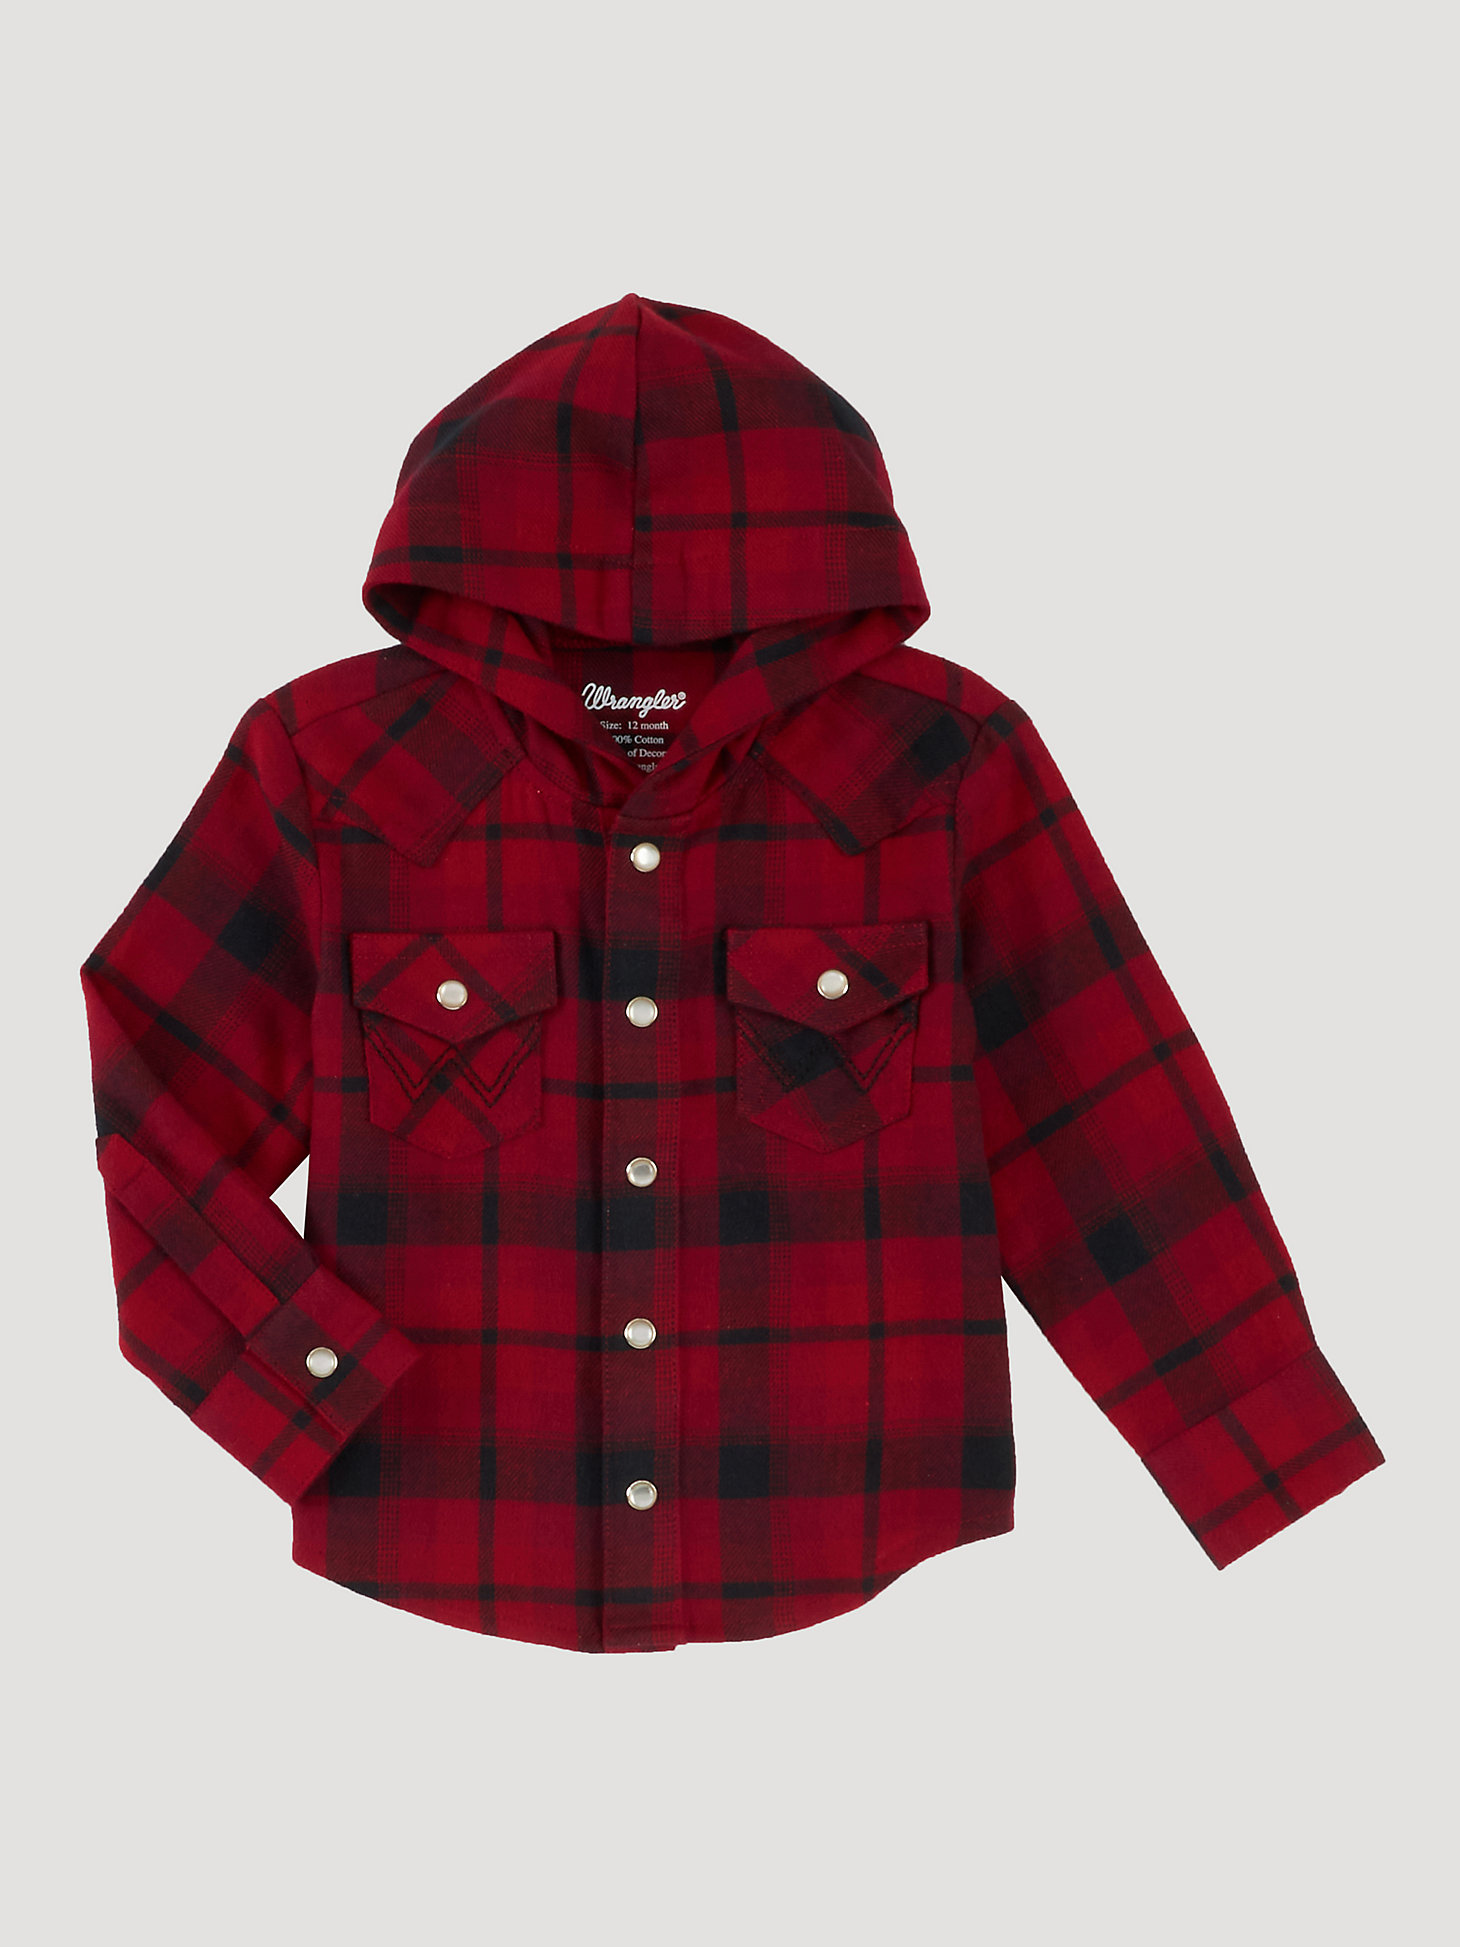 Kids Little Boys Girls Baby Long Sleeve Button Down Hooded Plaid Shirt Red Plaid Flannel Outfits 